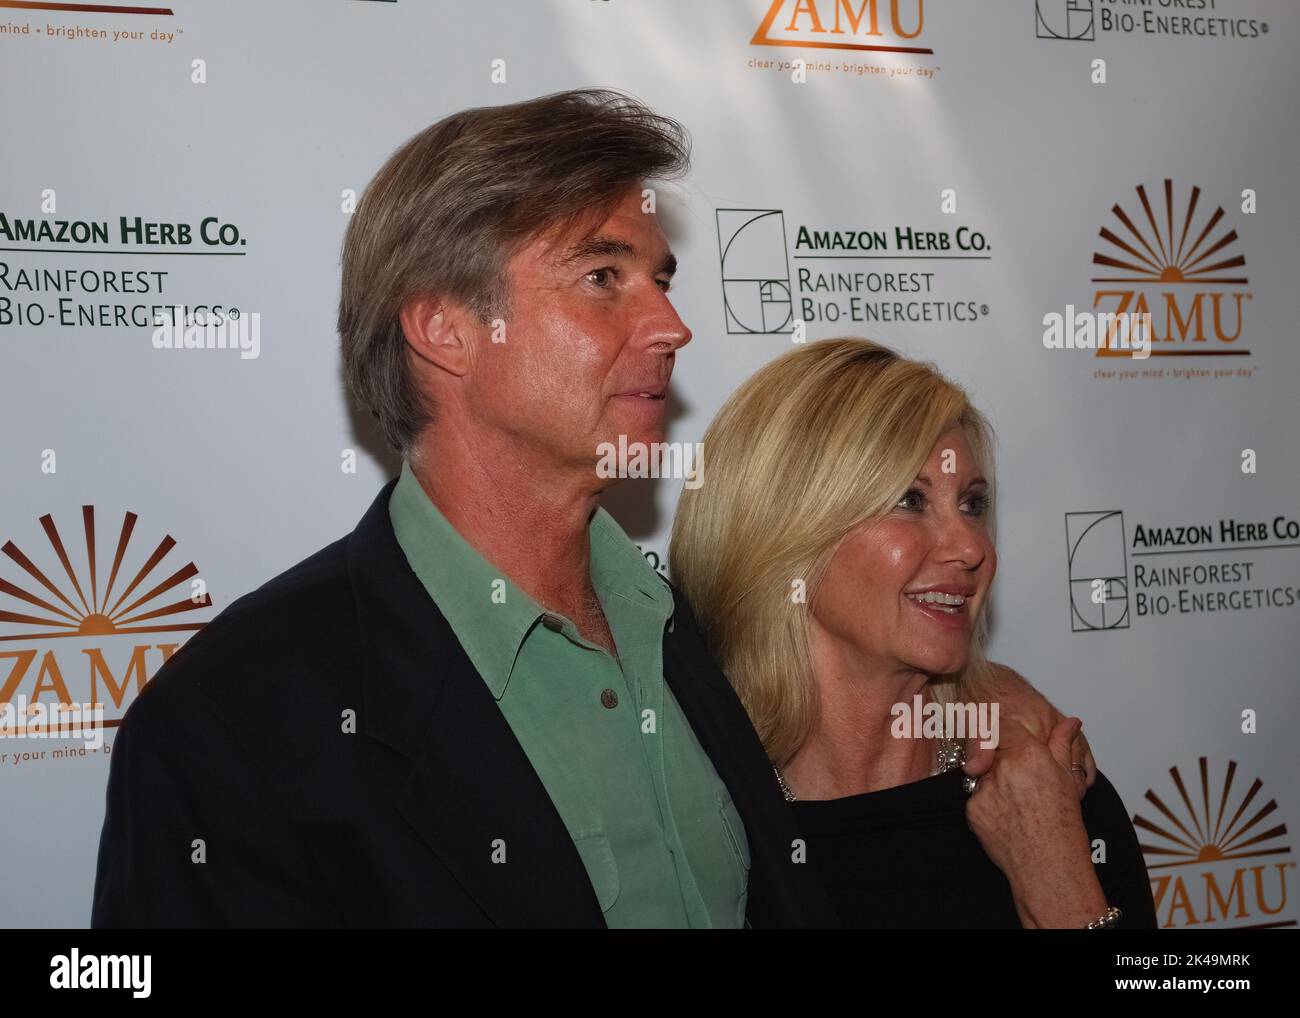 Cologne, Germany - October 6, 2009: Olivia Newton-John and her husband John Easterling visit a Amazon Herb showcase for the Zamu health drink in Colog Stock Photo